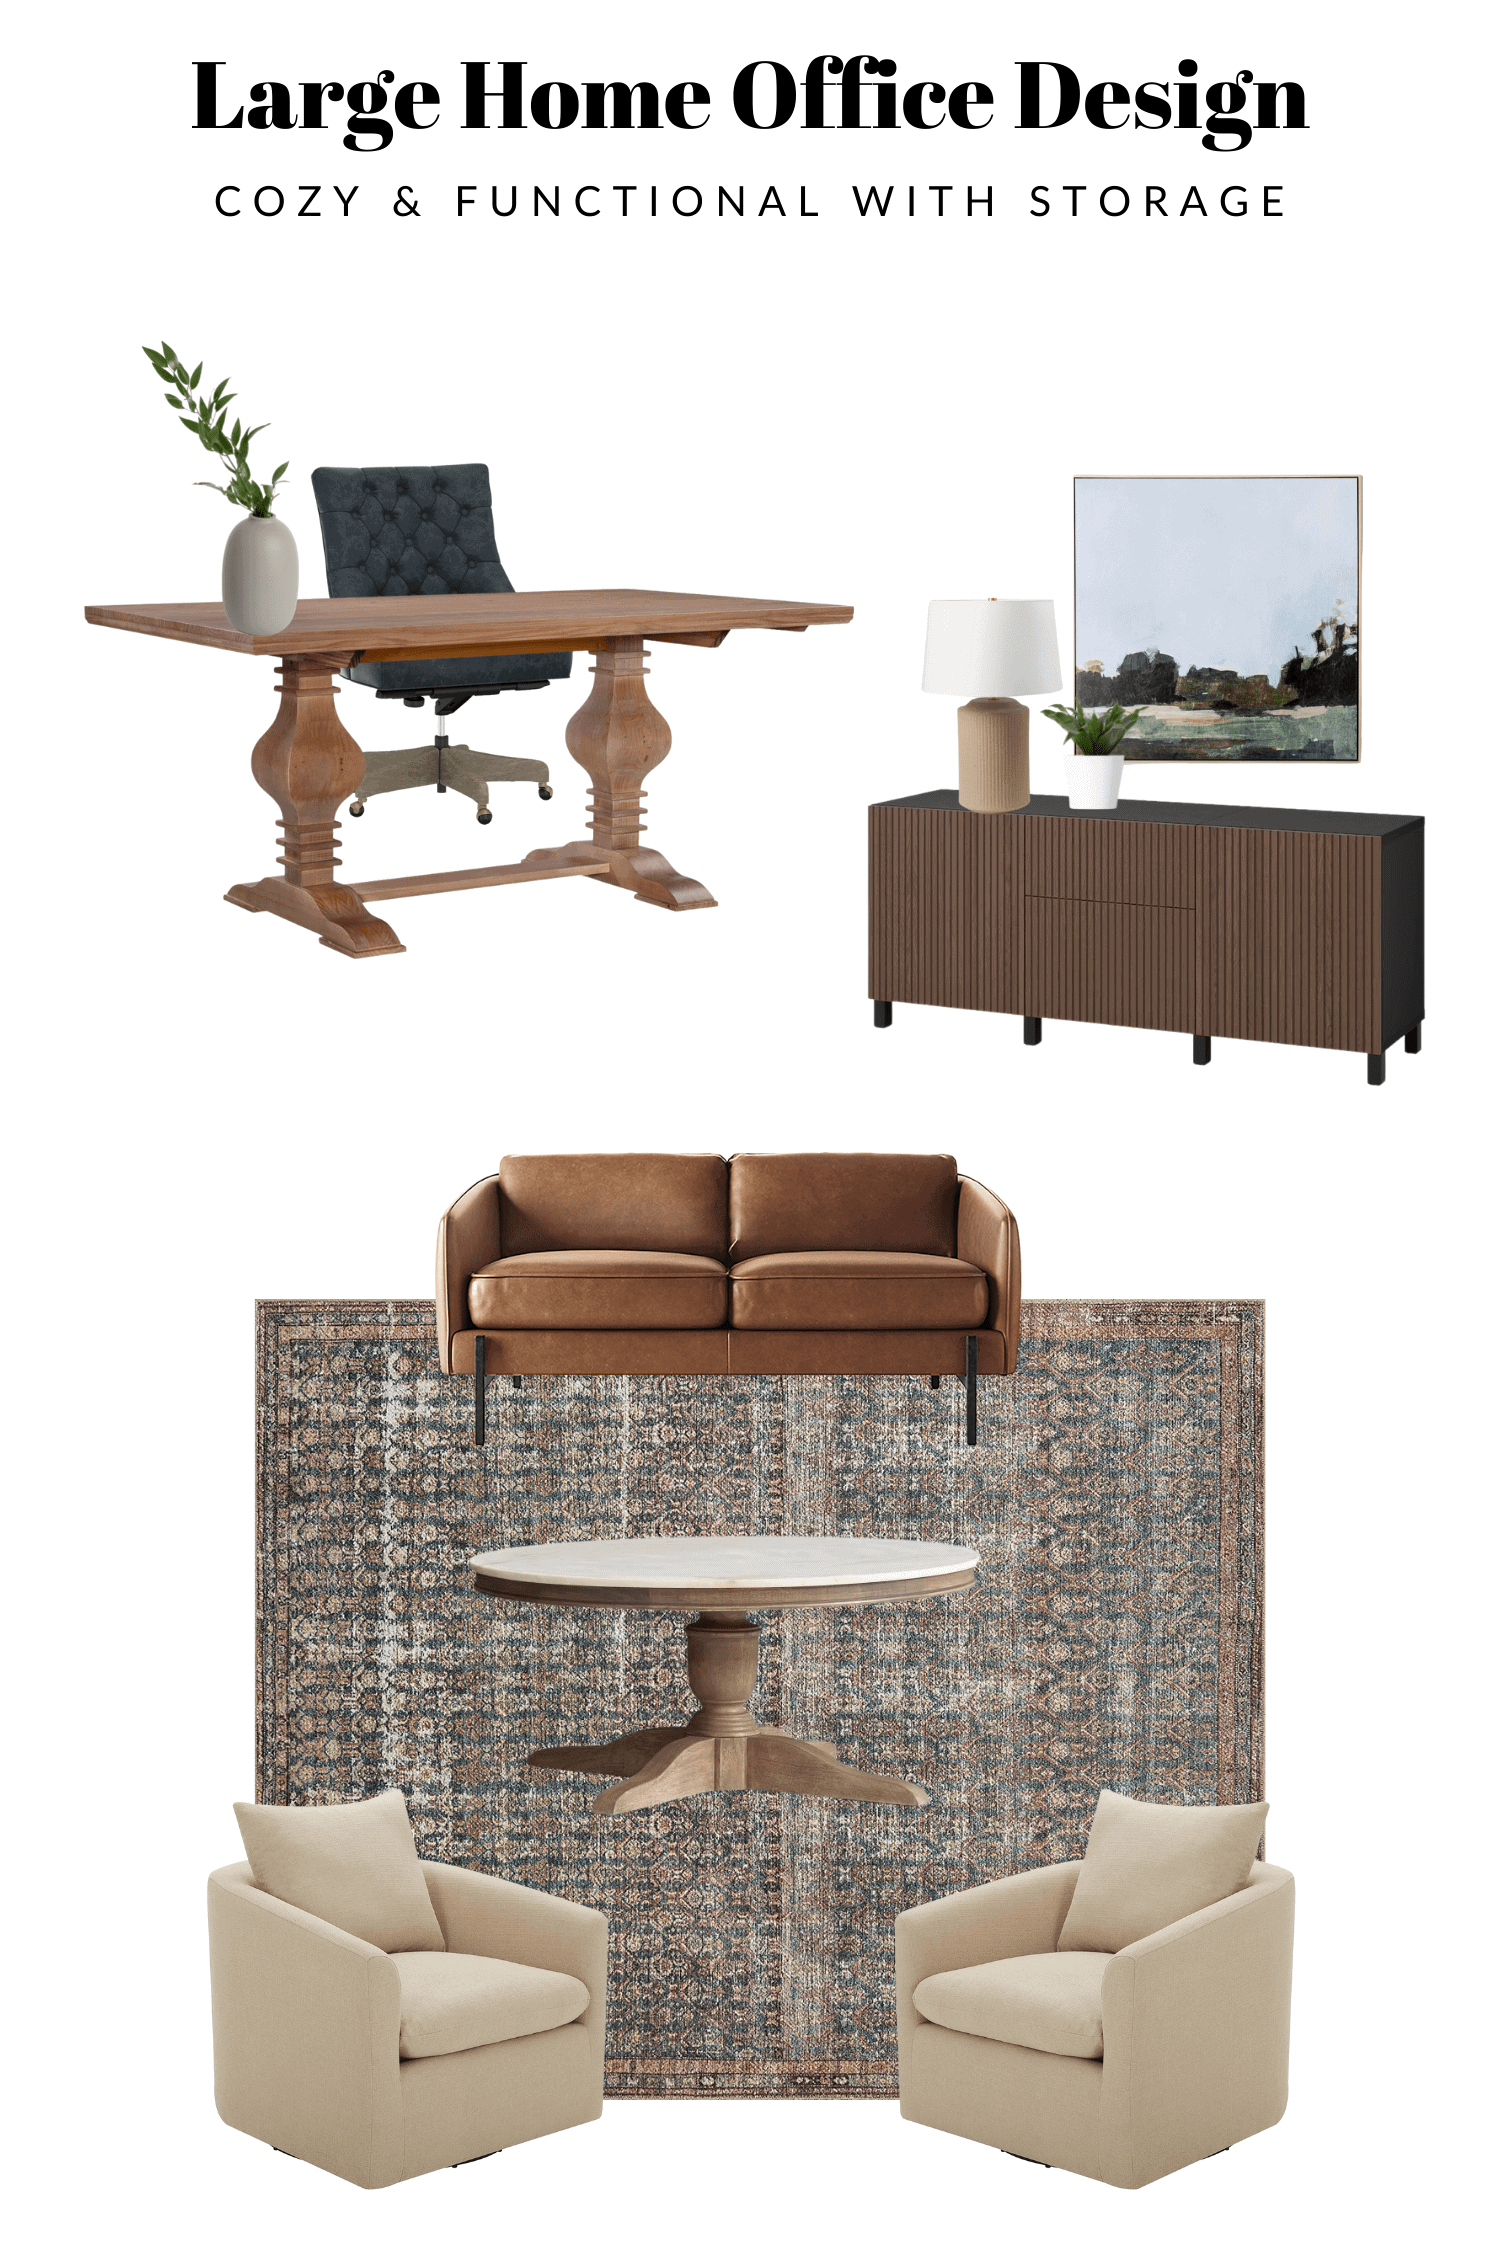 My design plan and mood board for a living room turned home office